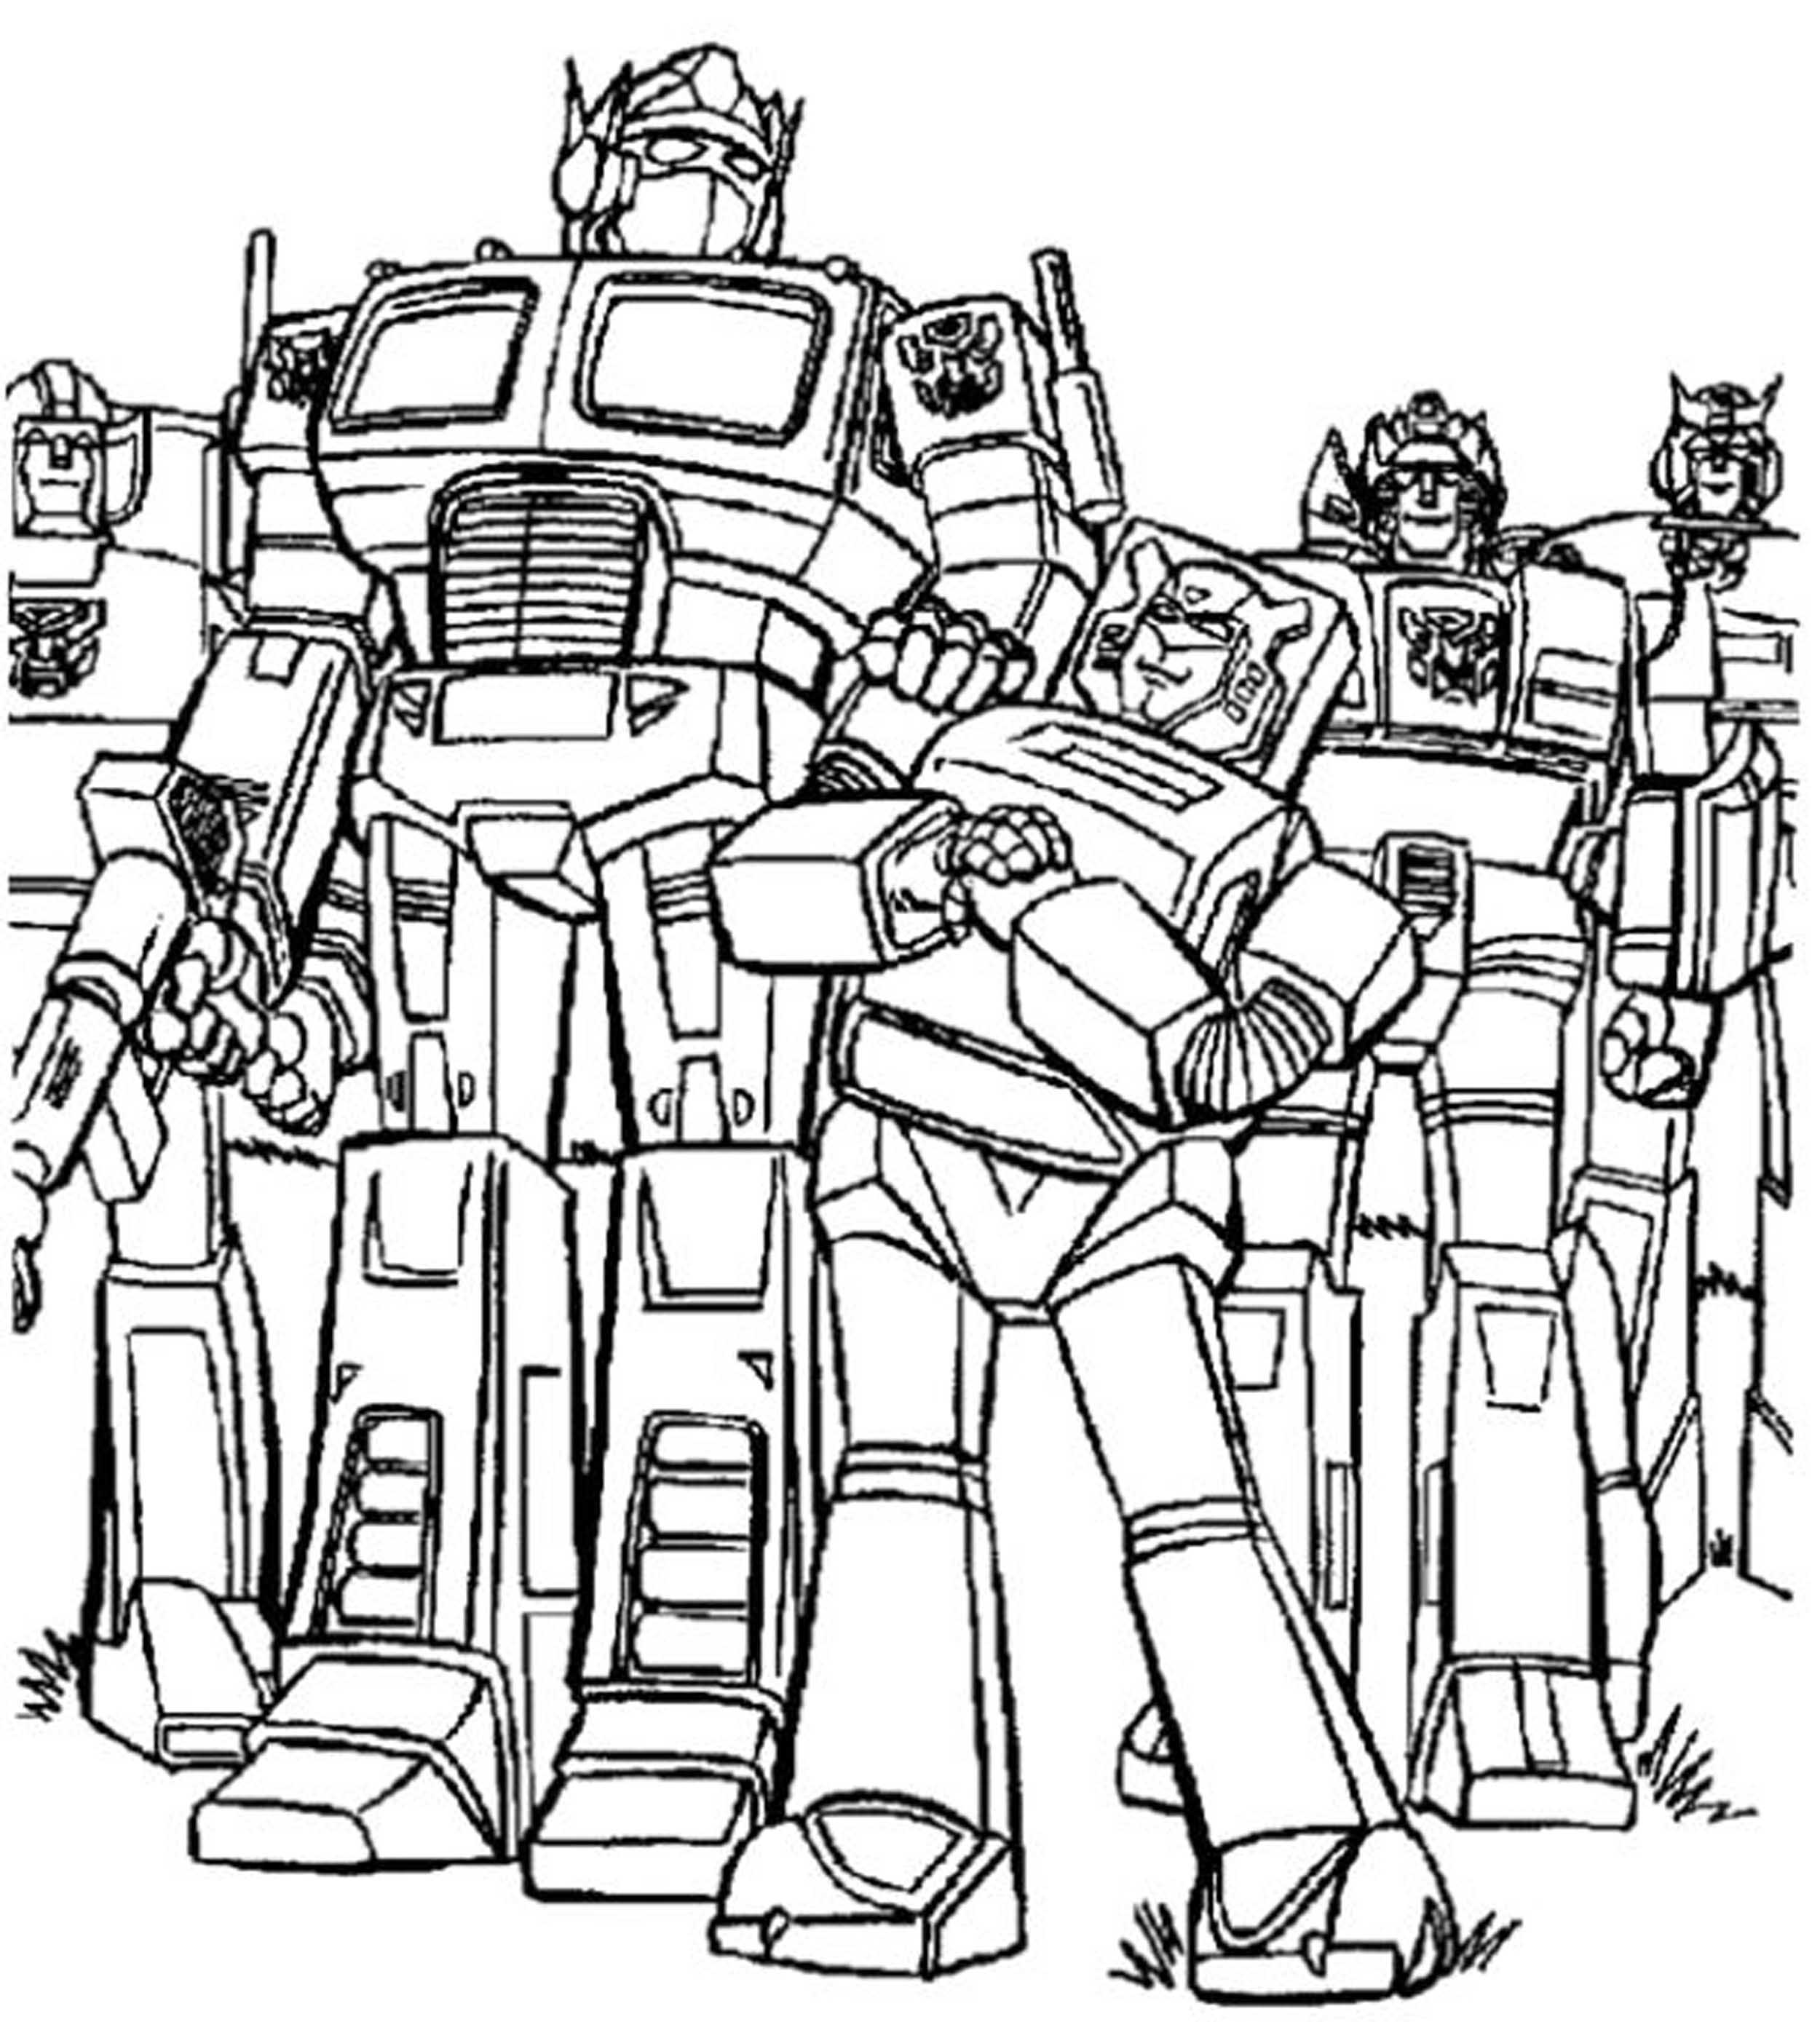 Print & Download - Inviting Kids to Do the Transformers Coloring Pages